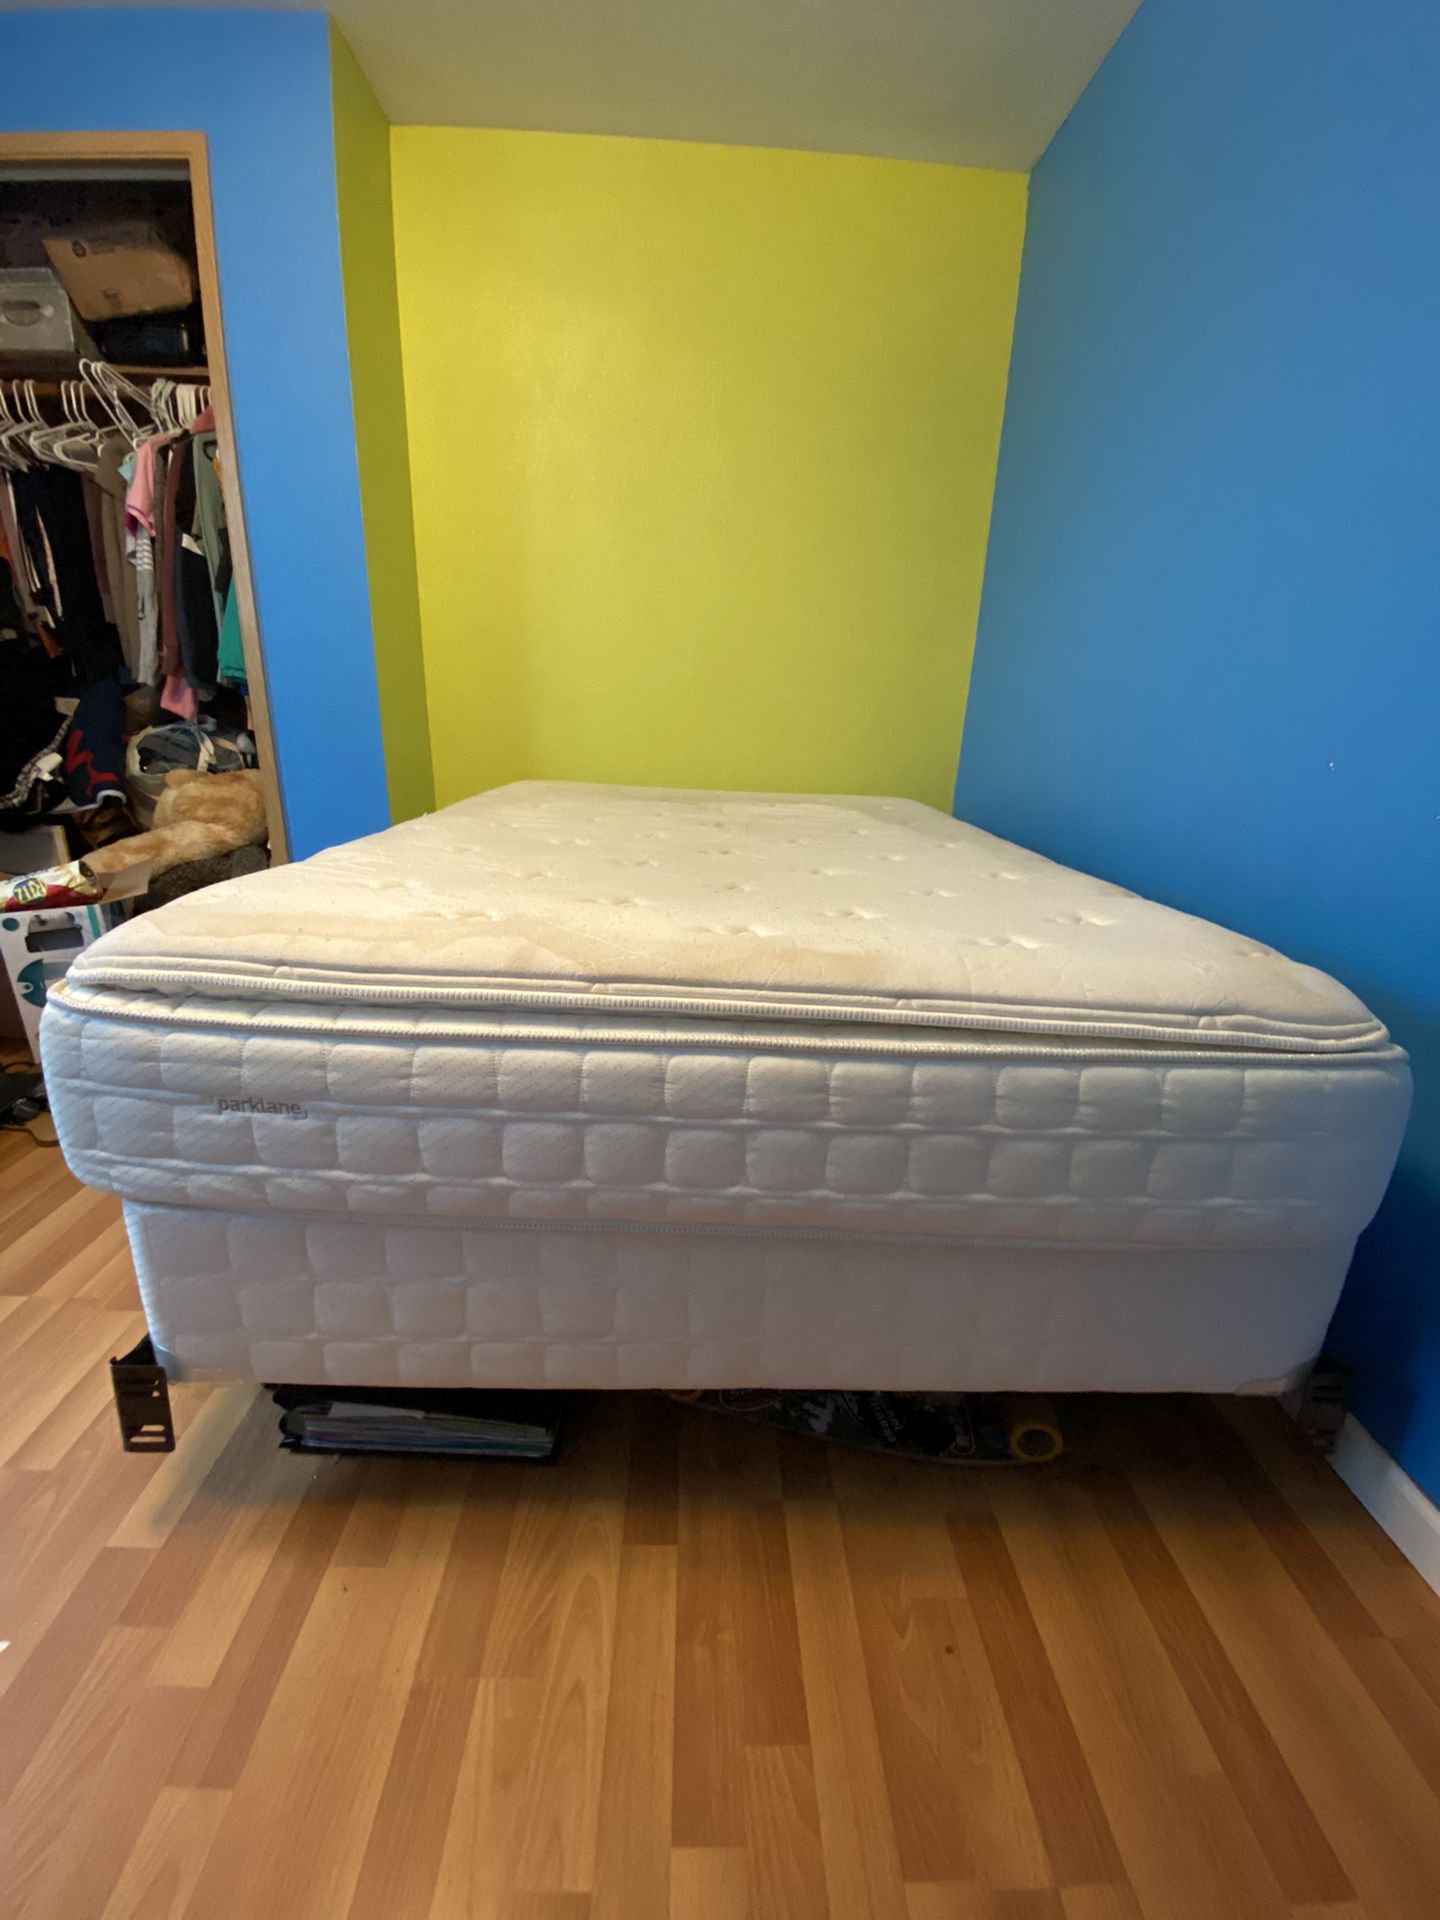 Free Full Mattress, Box spring, and Bed Frame